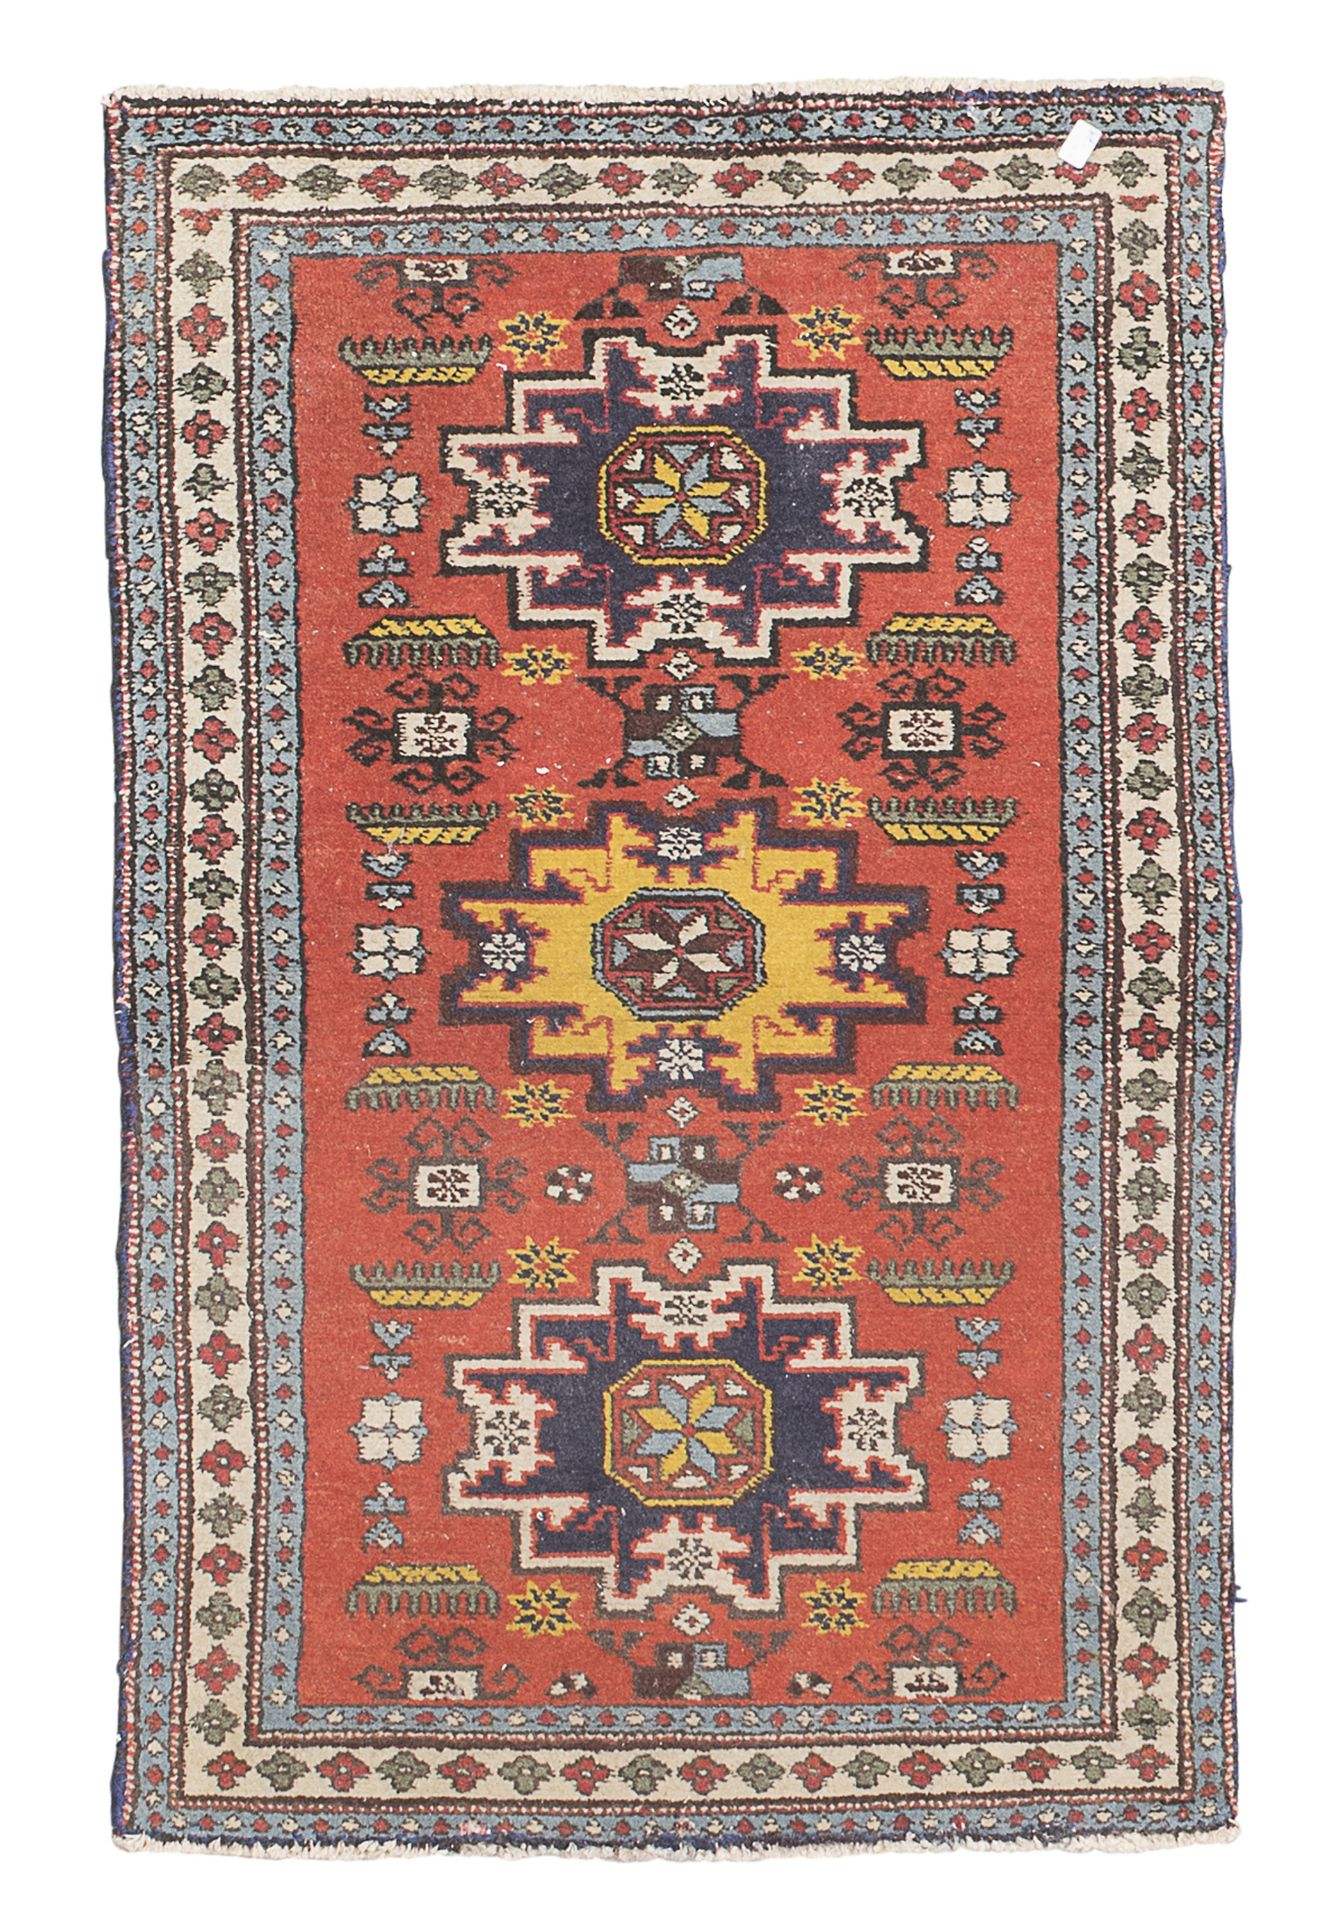 PERSIAN BED RUG EARLY 20TH CENTURY